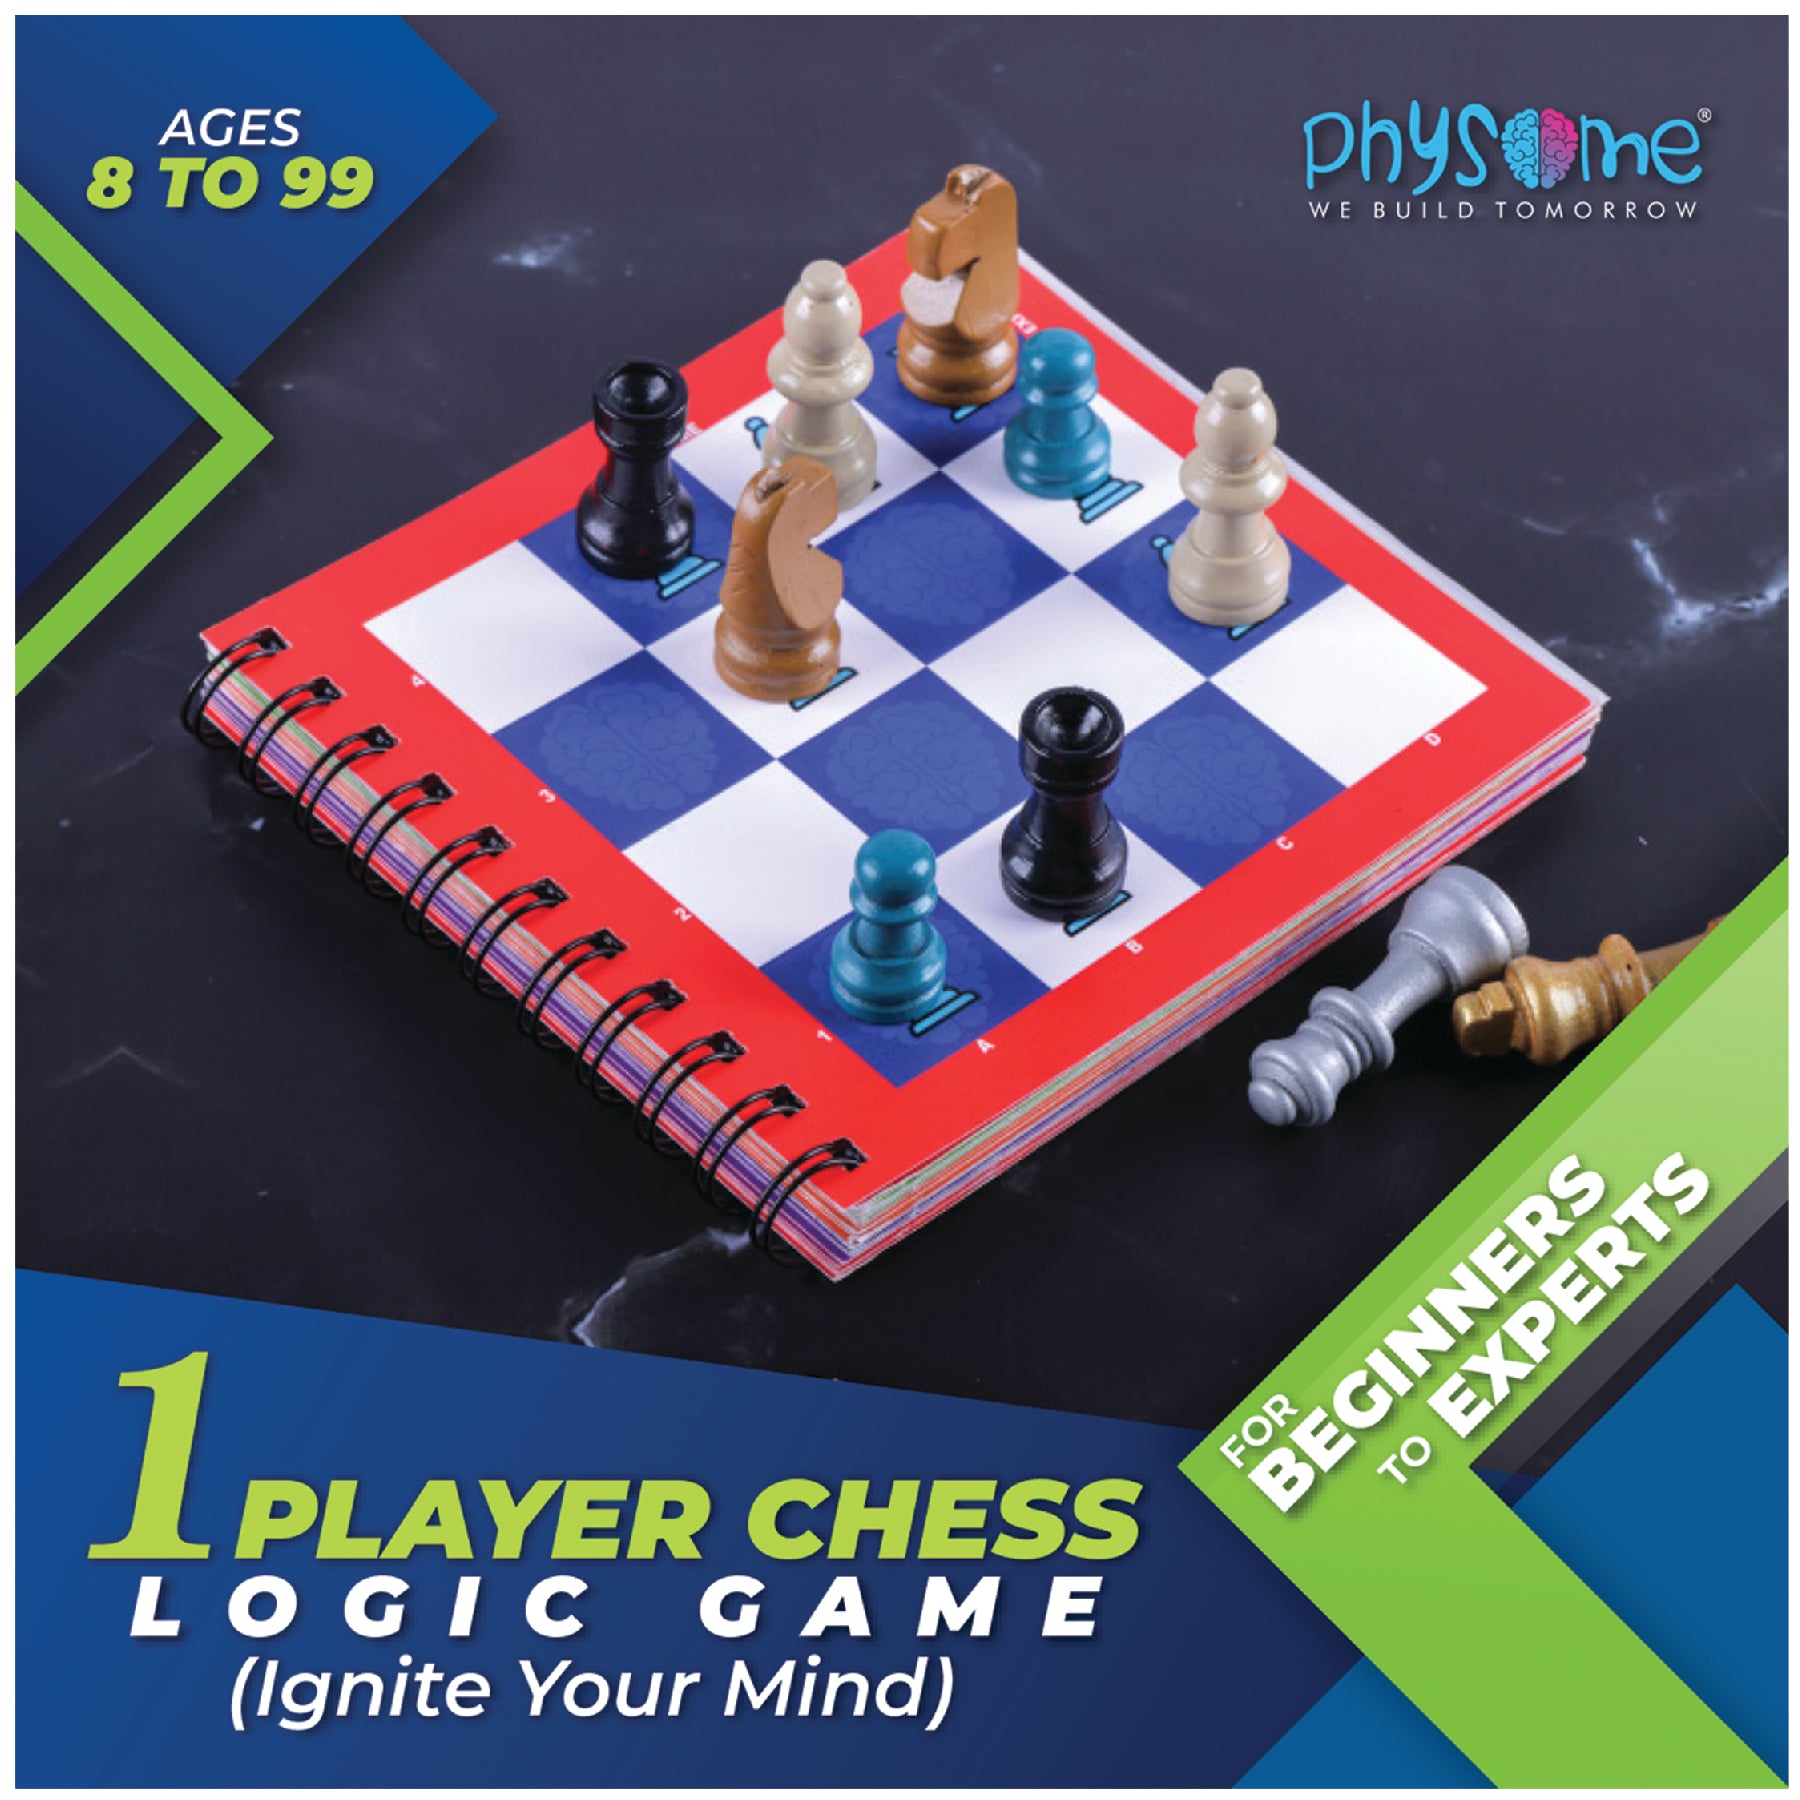 What type are you? #chessindia #chessplayer #healthy #chess #chessgame